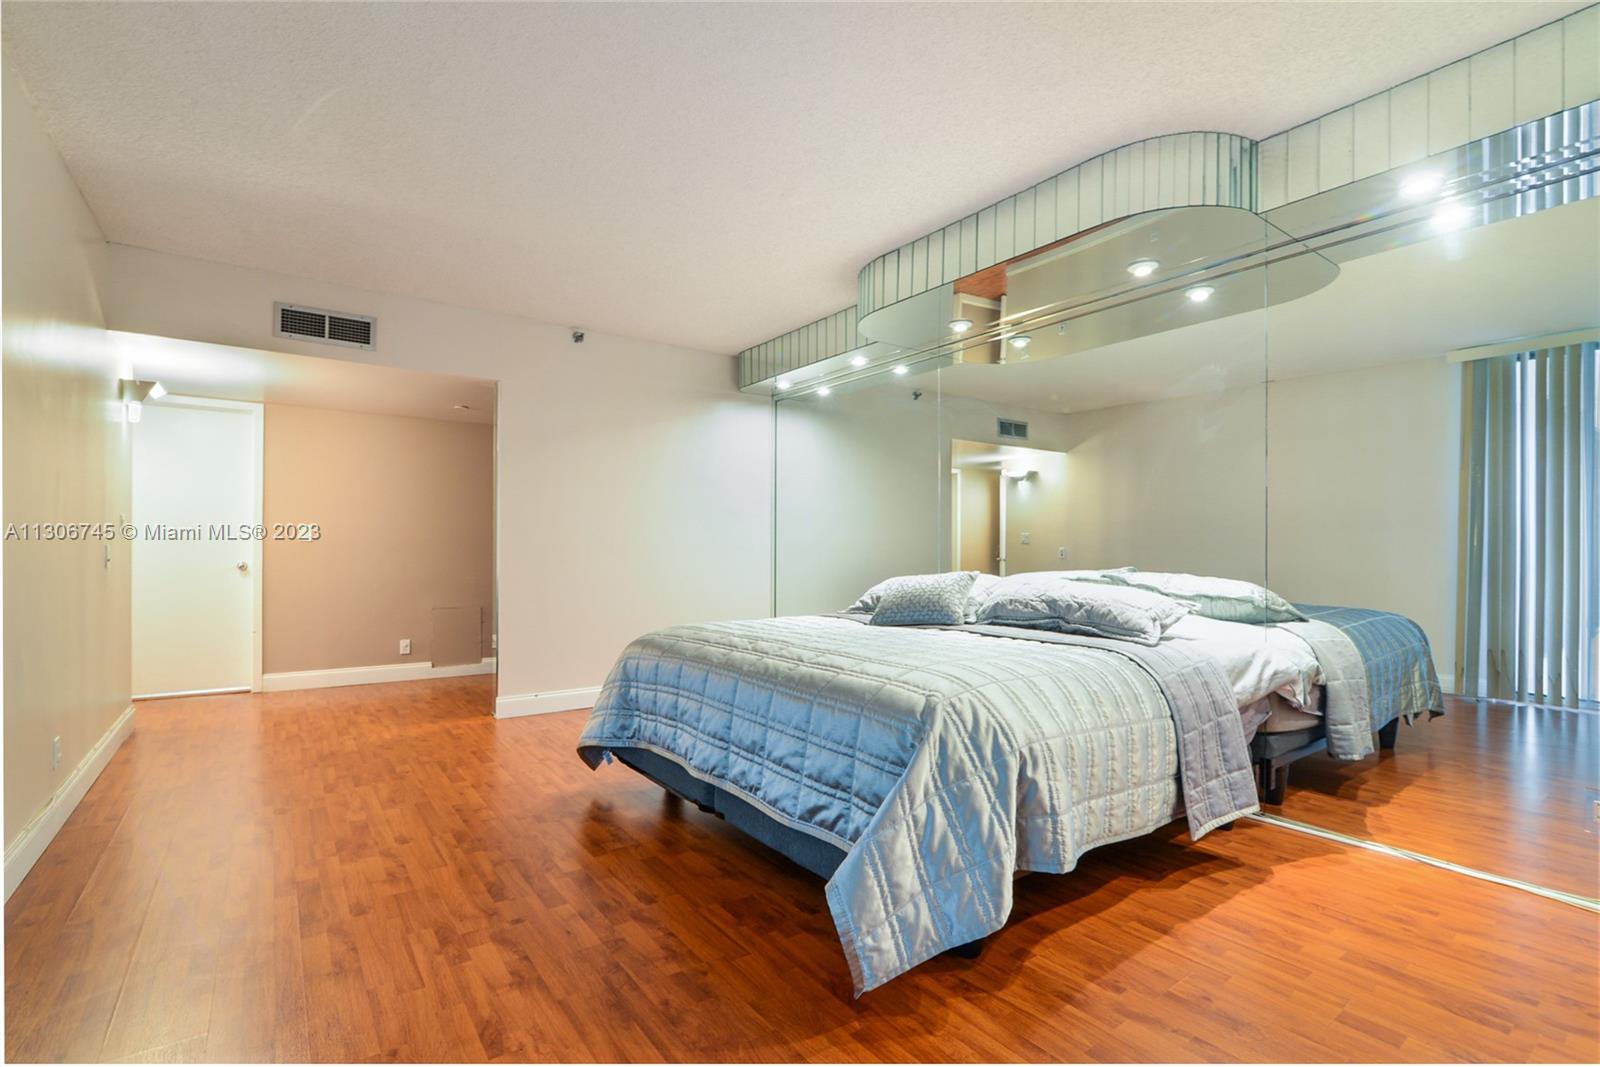 Large Master Bedroom in suite with a giant walking closet